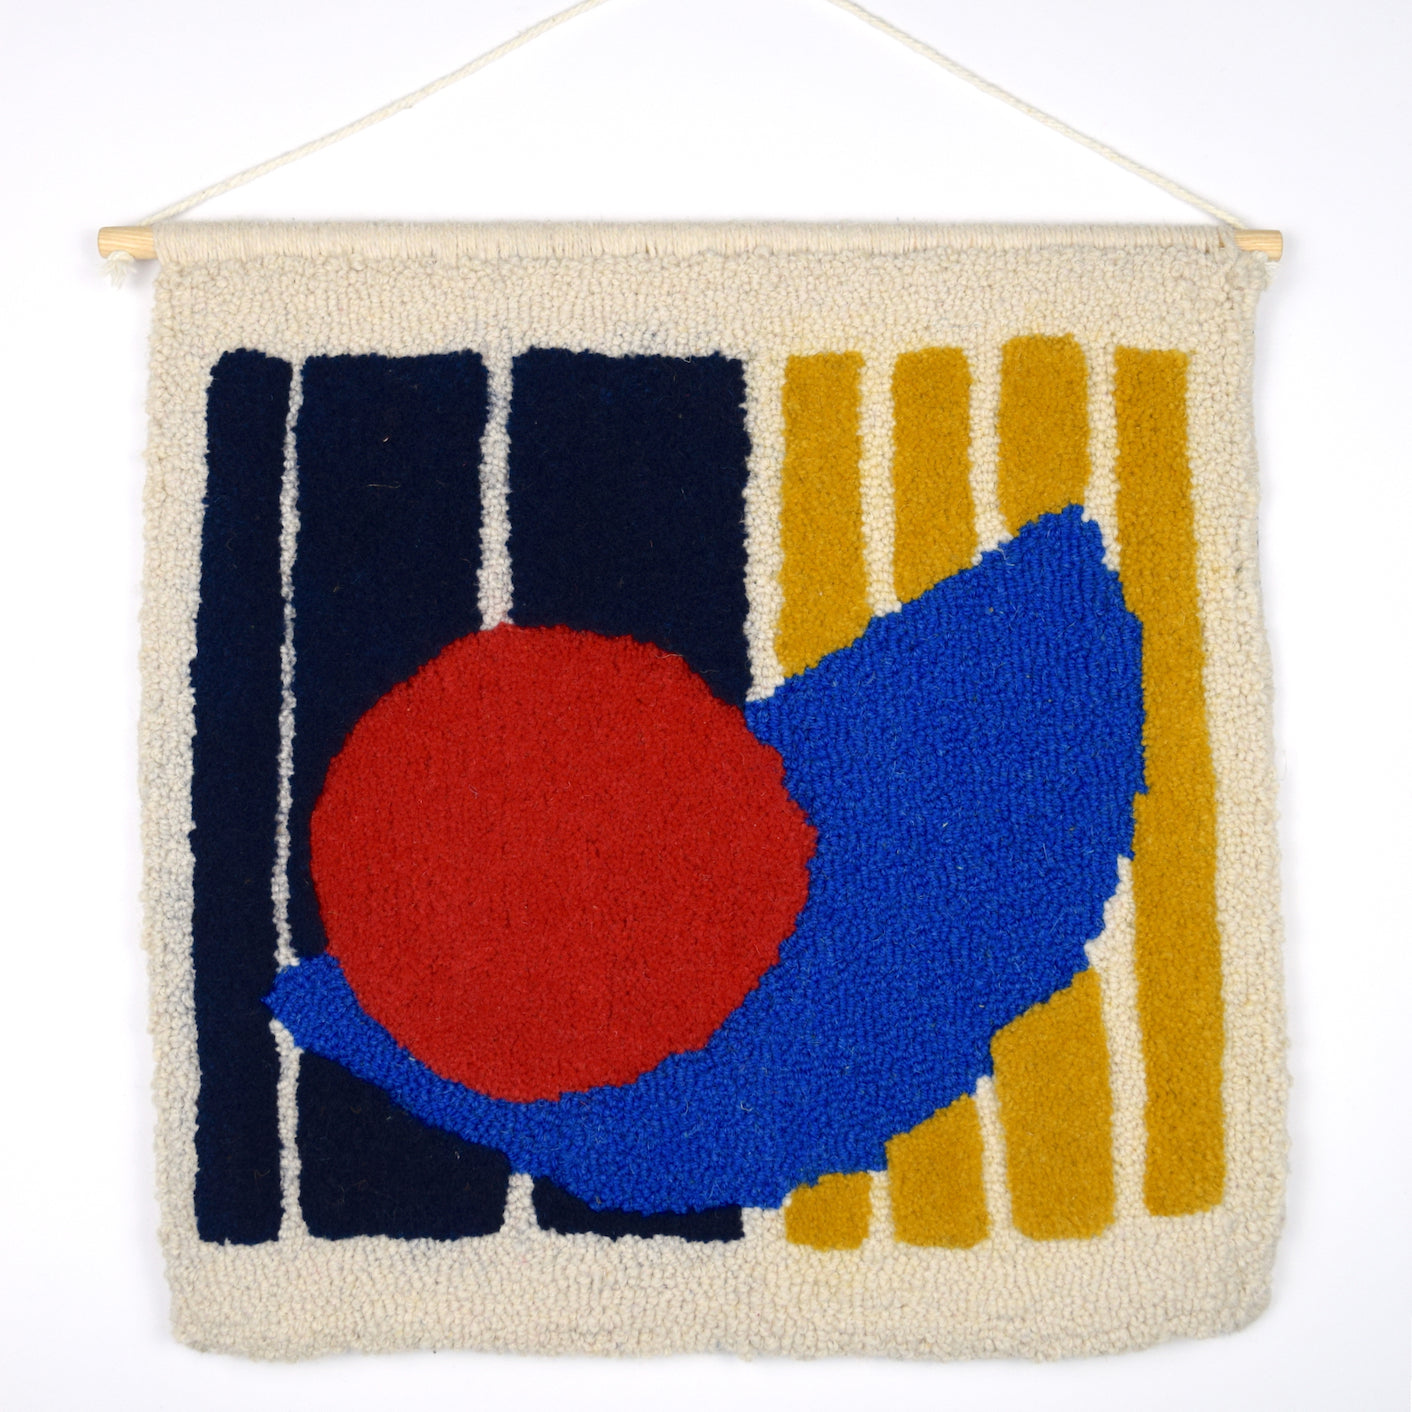 OFF TO SEA  - Mustard, Red and Blue - Hand Tufted Wall Hanging